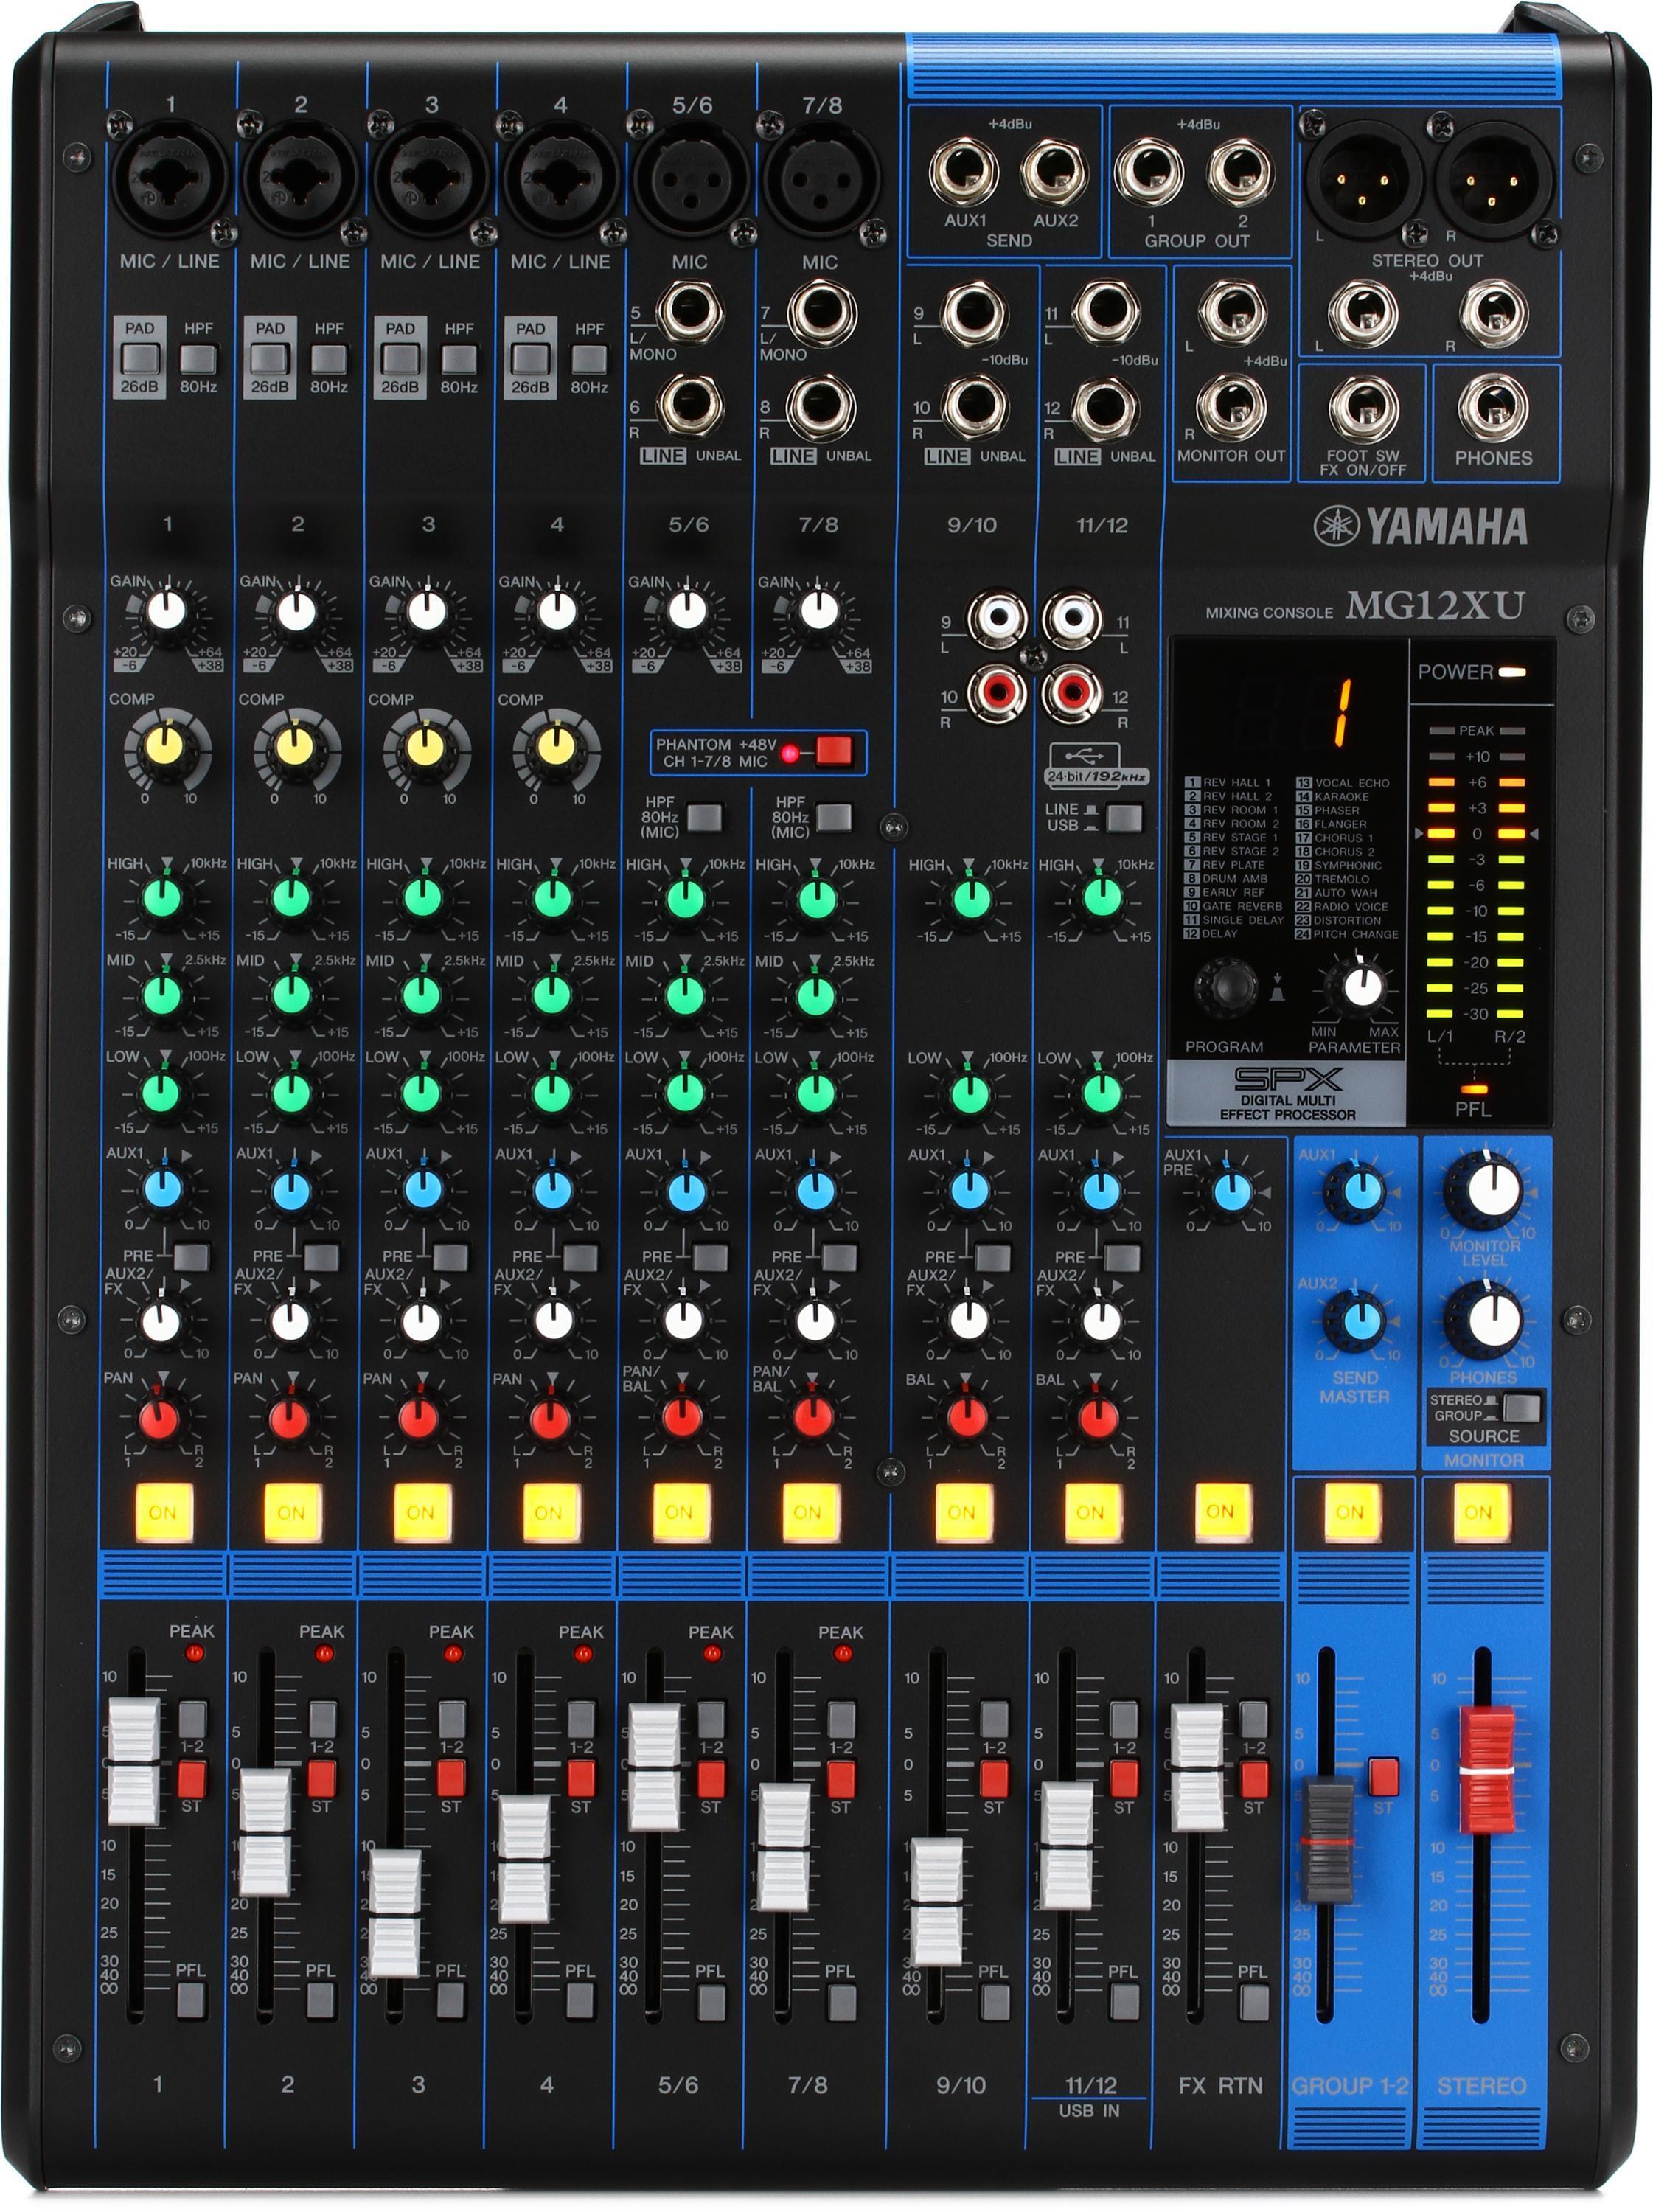 Yamaha MG12XU 12-channel Mixer with USB and Effects | Sweetwater